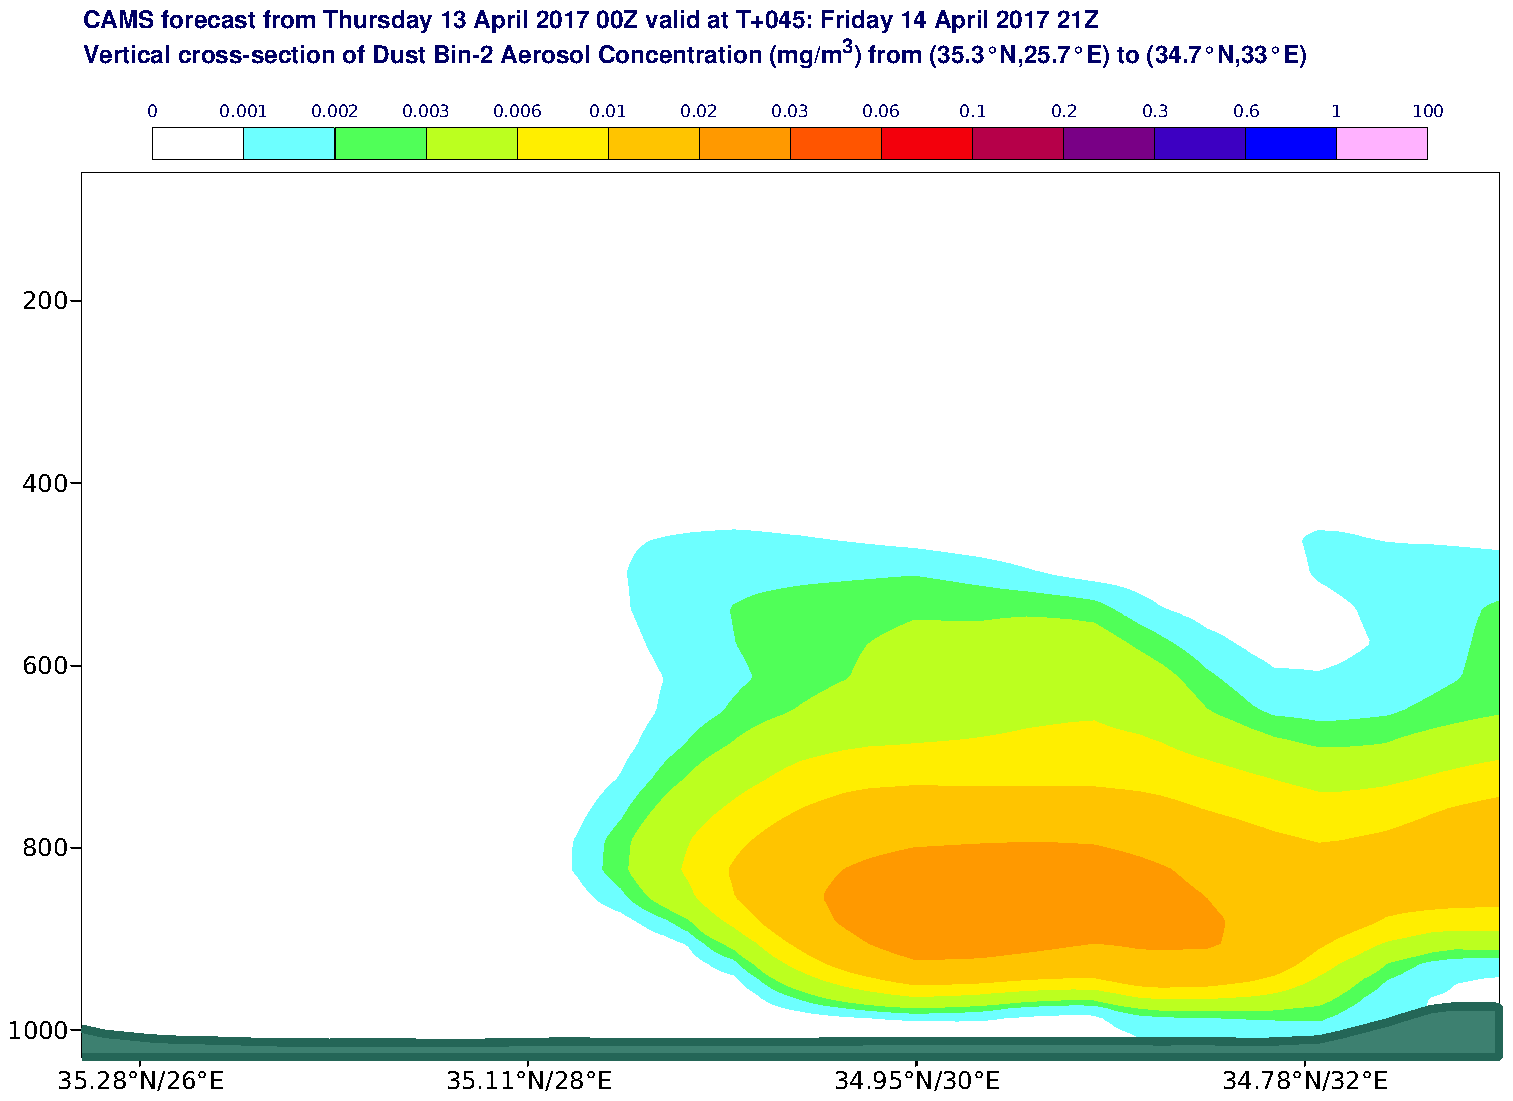 Vertical cross-section of Dust Bin-2 Aerosol Concentration (mg/m3) valid at T45 - 2017-04-14 21:00